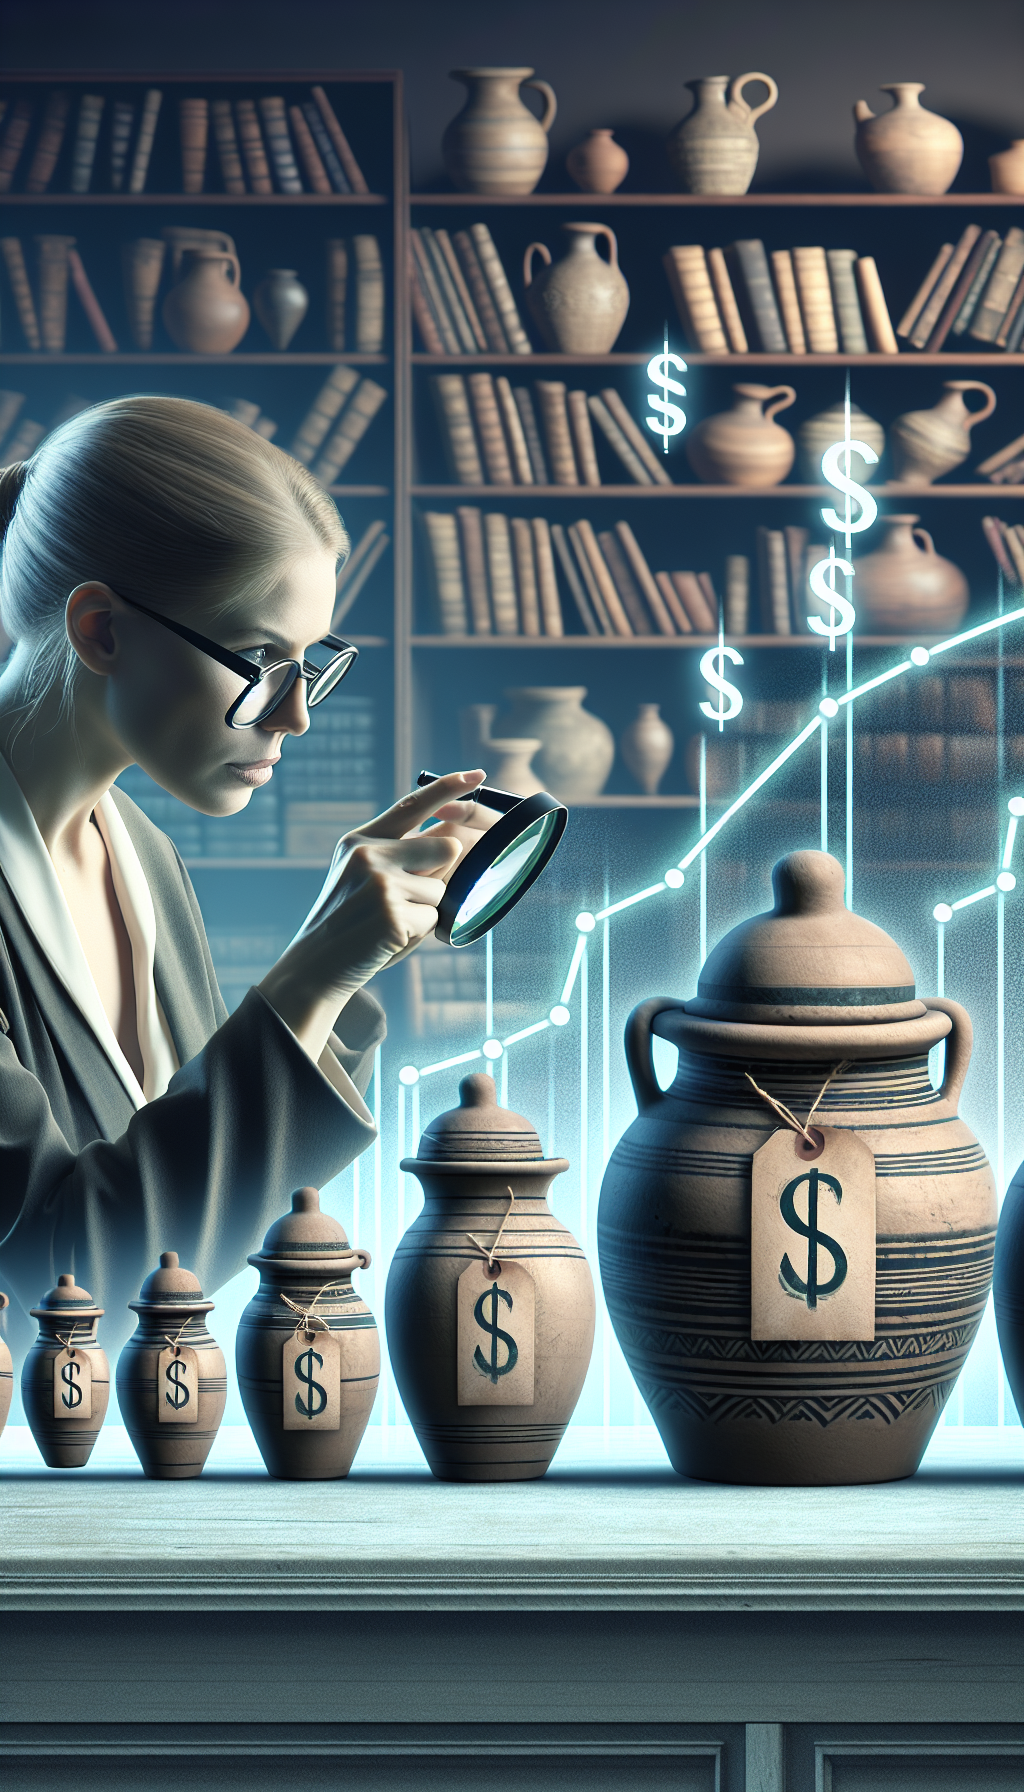 An illustration of a bespectacled antique expert examining a line of stoneware crocks with a magnifying glass, each crock adorned with a price tag that increases in value from left to right. The backdrop features a faded library of antique guides, hinting at the wealth of knowledge required for appraisal, with a shimmering dollar sign subtly overlayed on the foremost valuable crock.